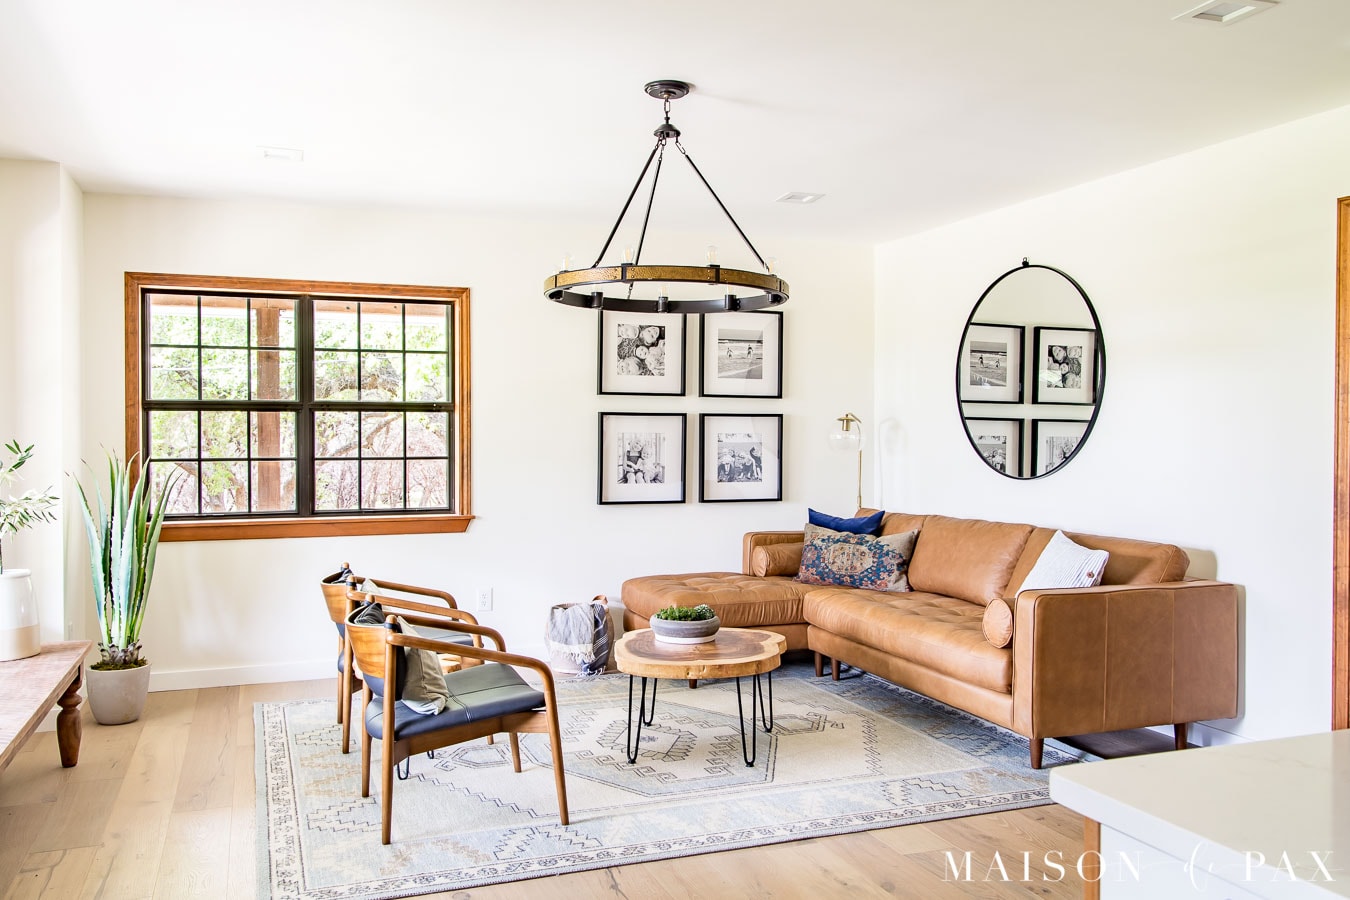 mid century modern leather chairs and sectional | Maison de Pax